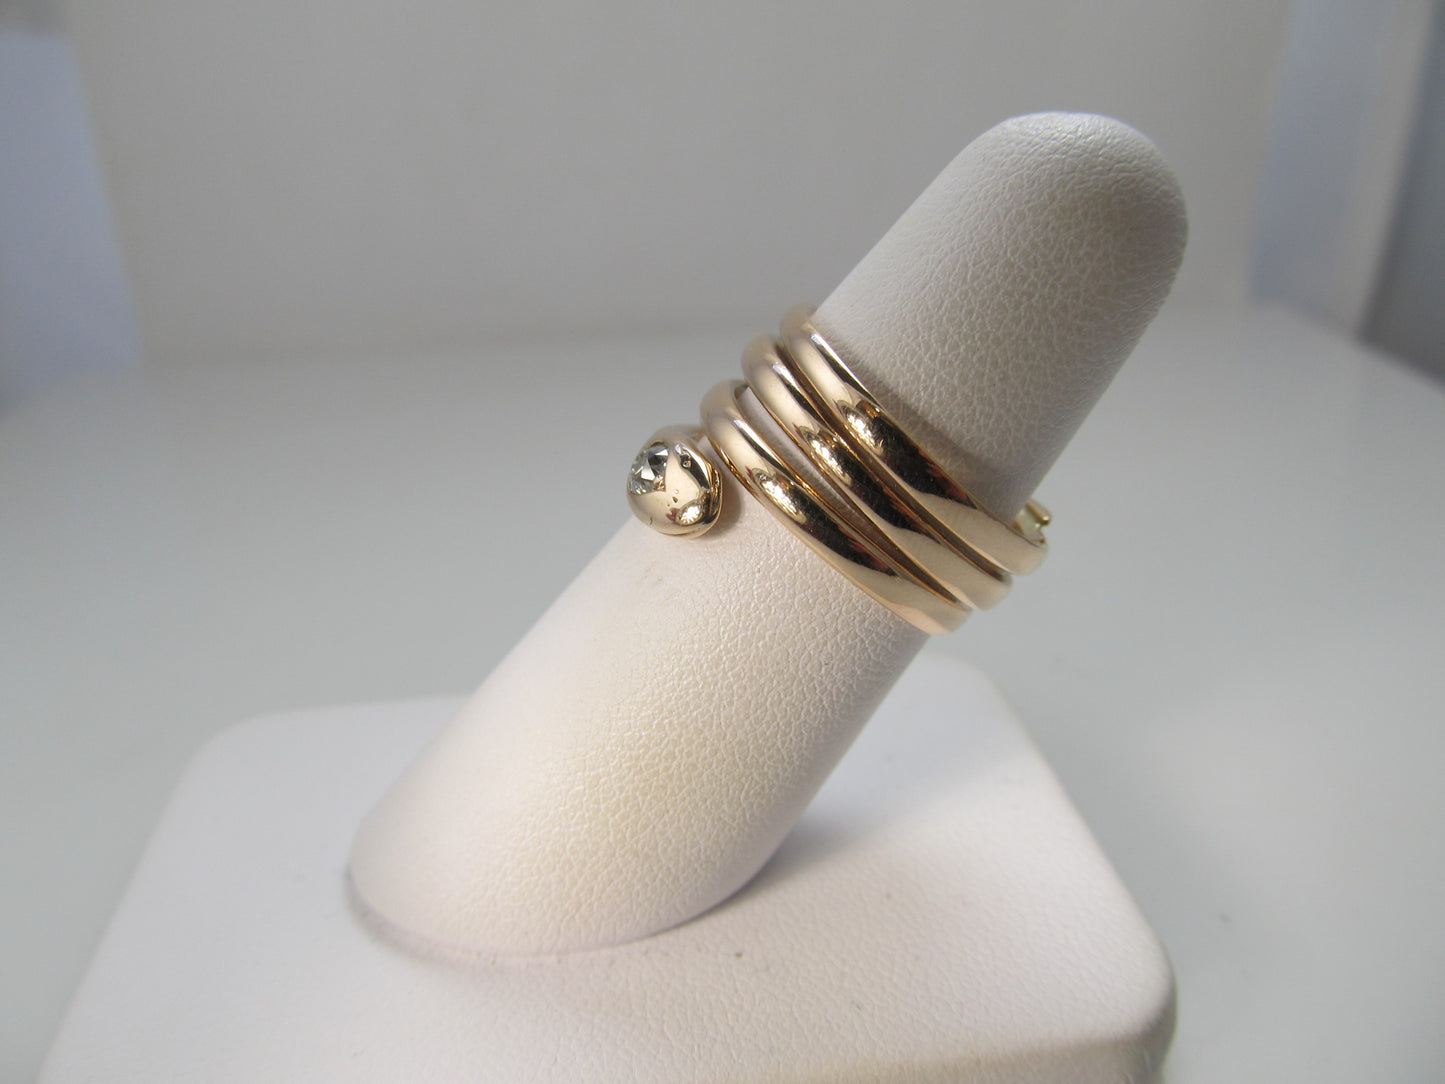 Antique coiled rose gold snake ring with a diamond